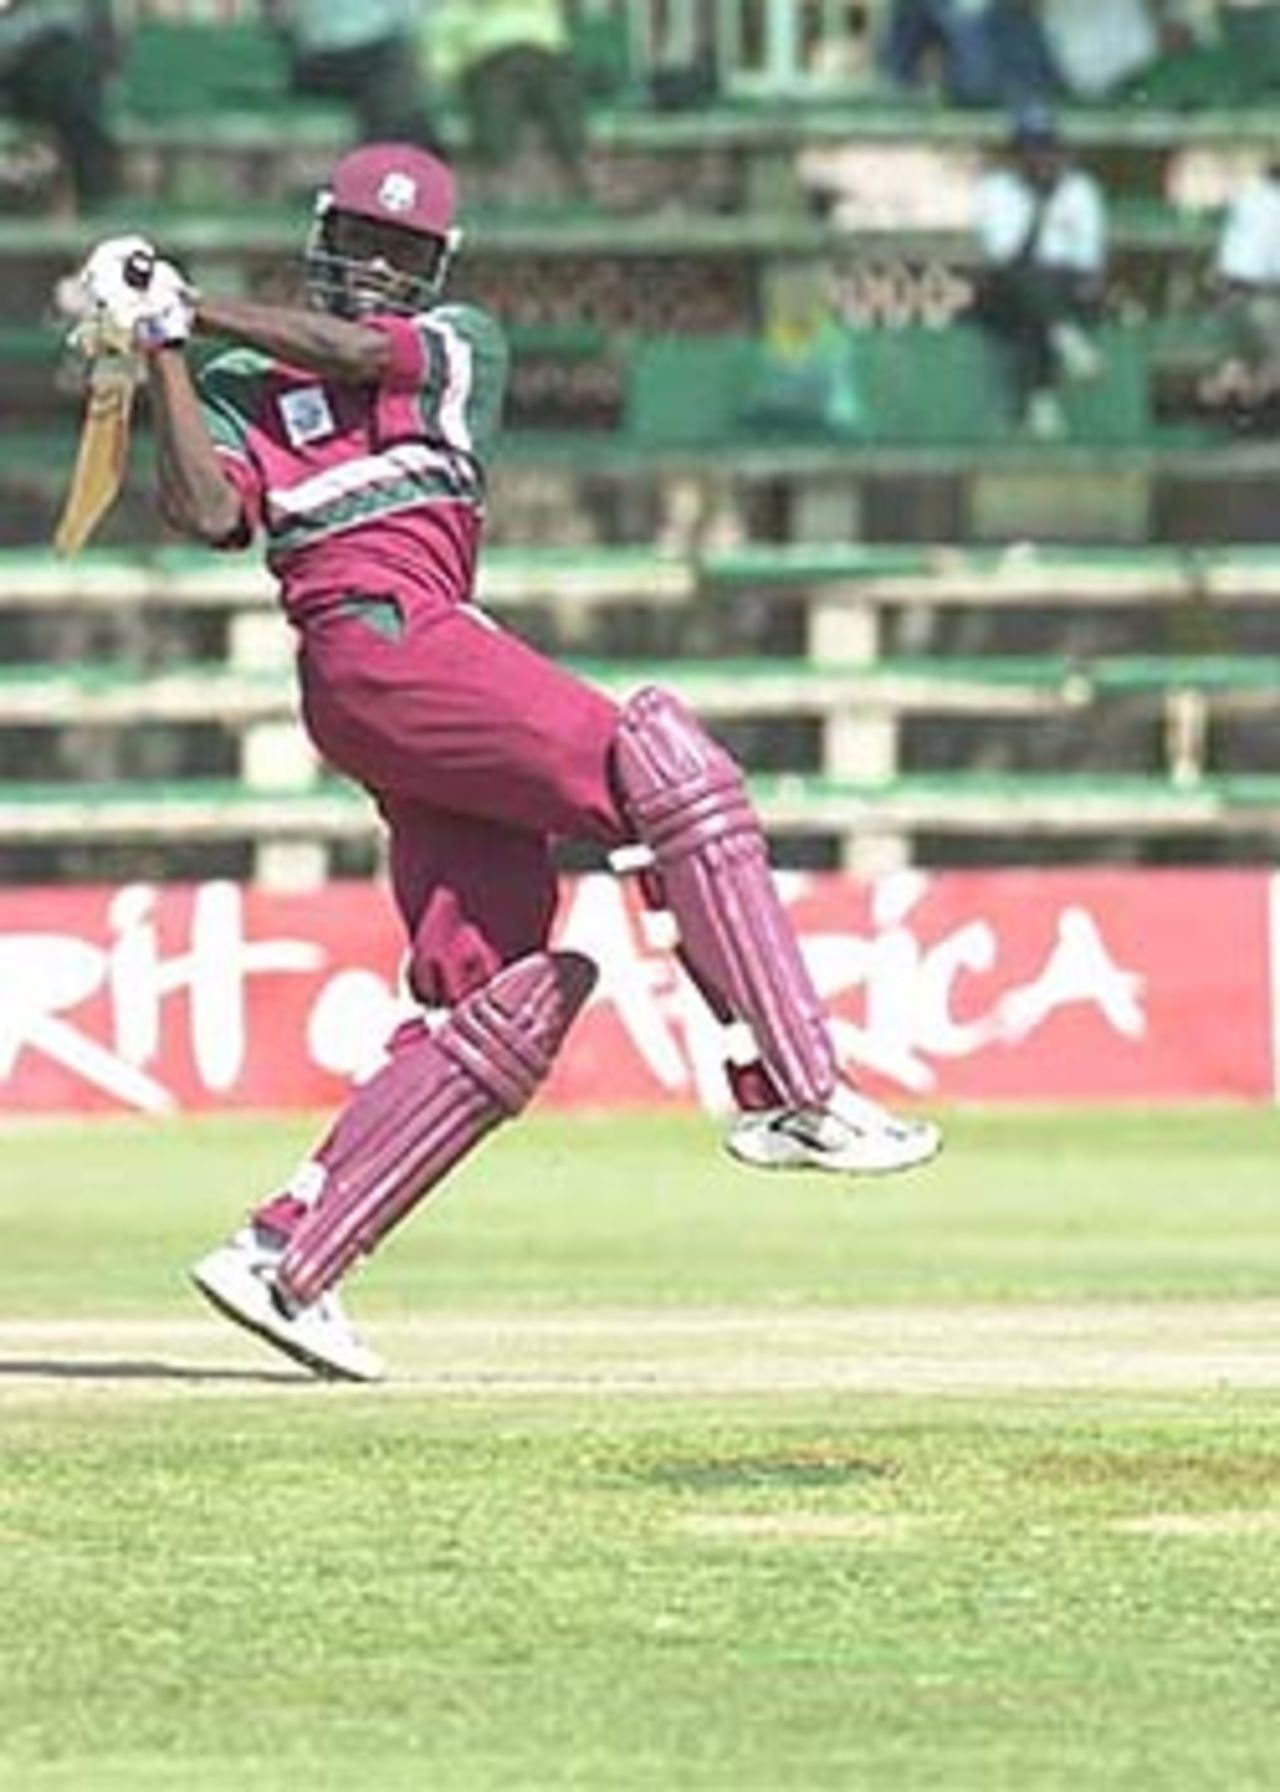 Hinds plays the hook shot to perfection, ICC KnockOut, 2000/01, 2nd Preliminary Quarter Final, Sri Lanka v West Indies, Gymkhana Club Ground, Nairobi, 04 October 2000.